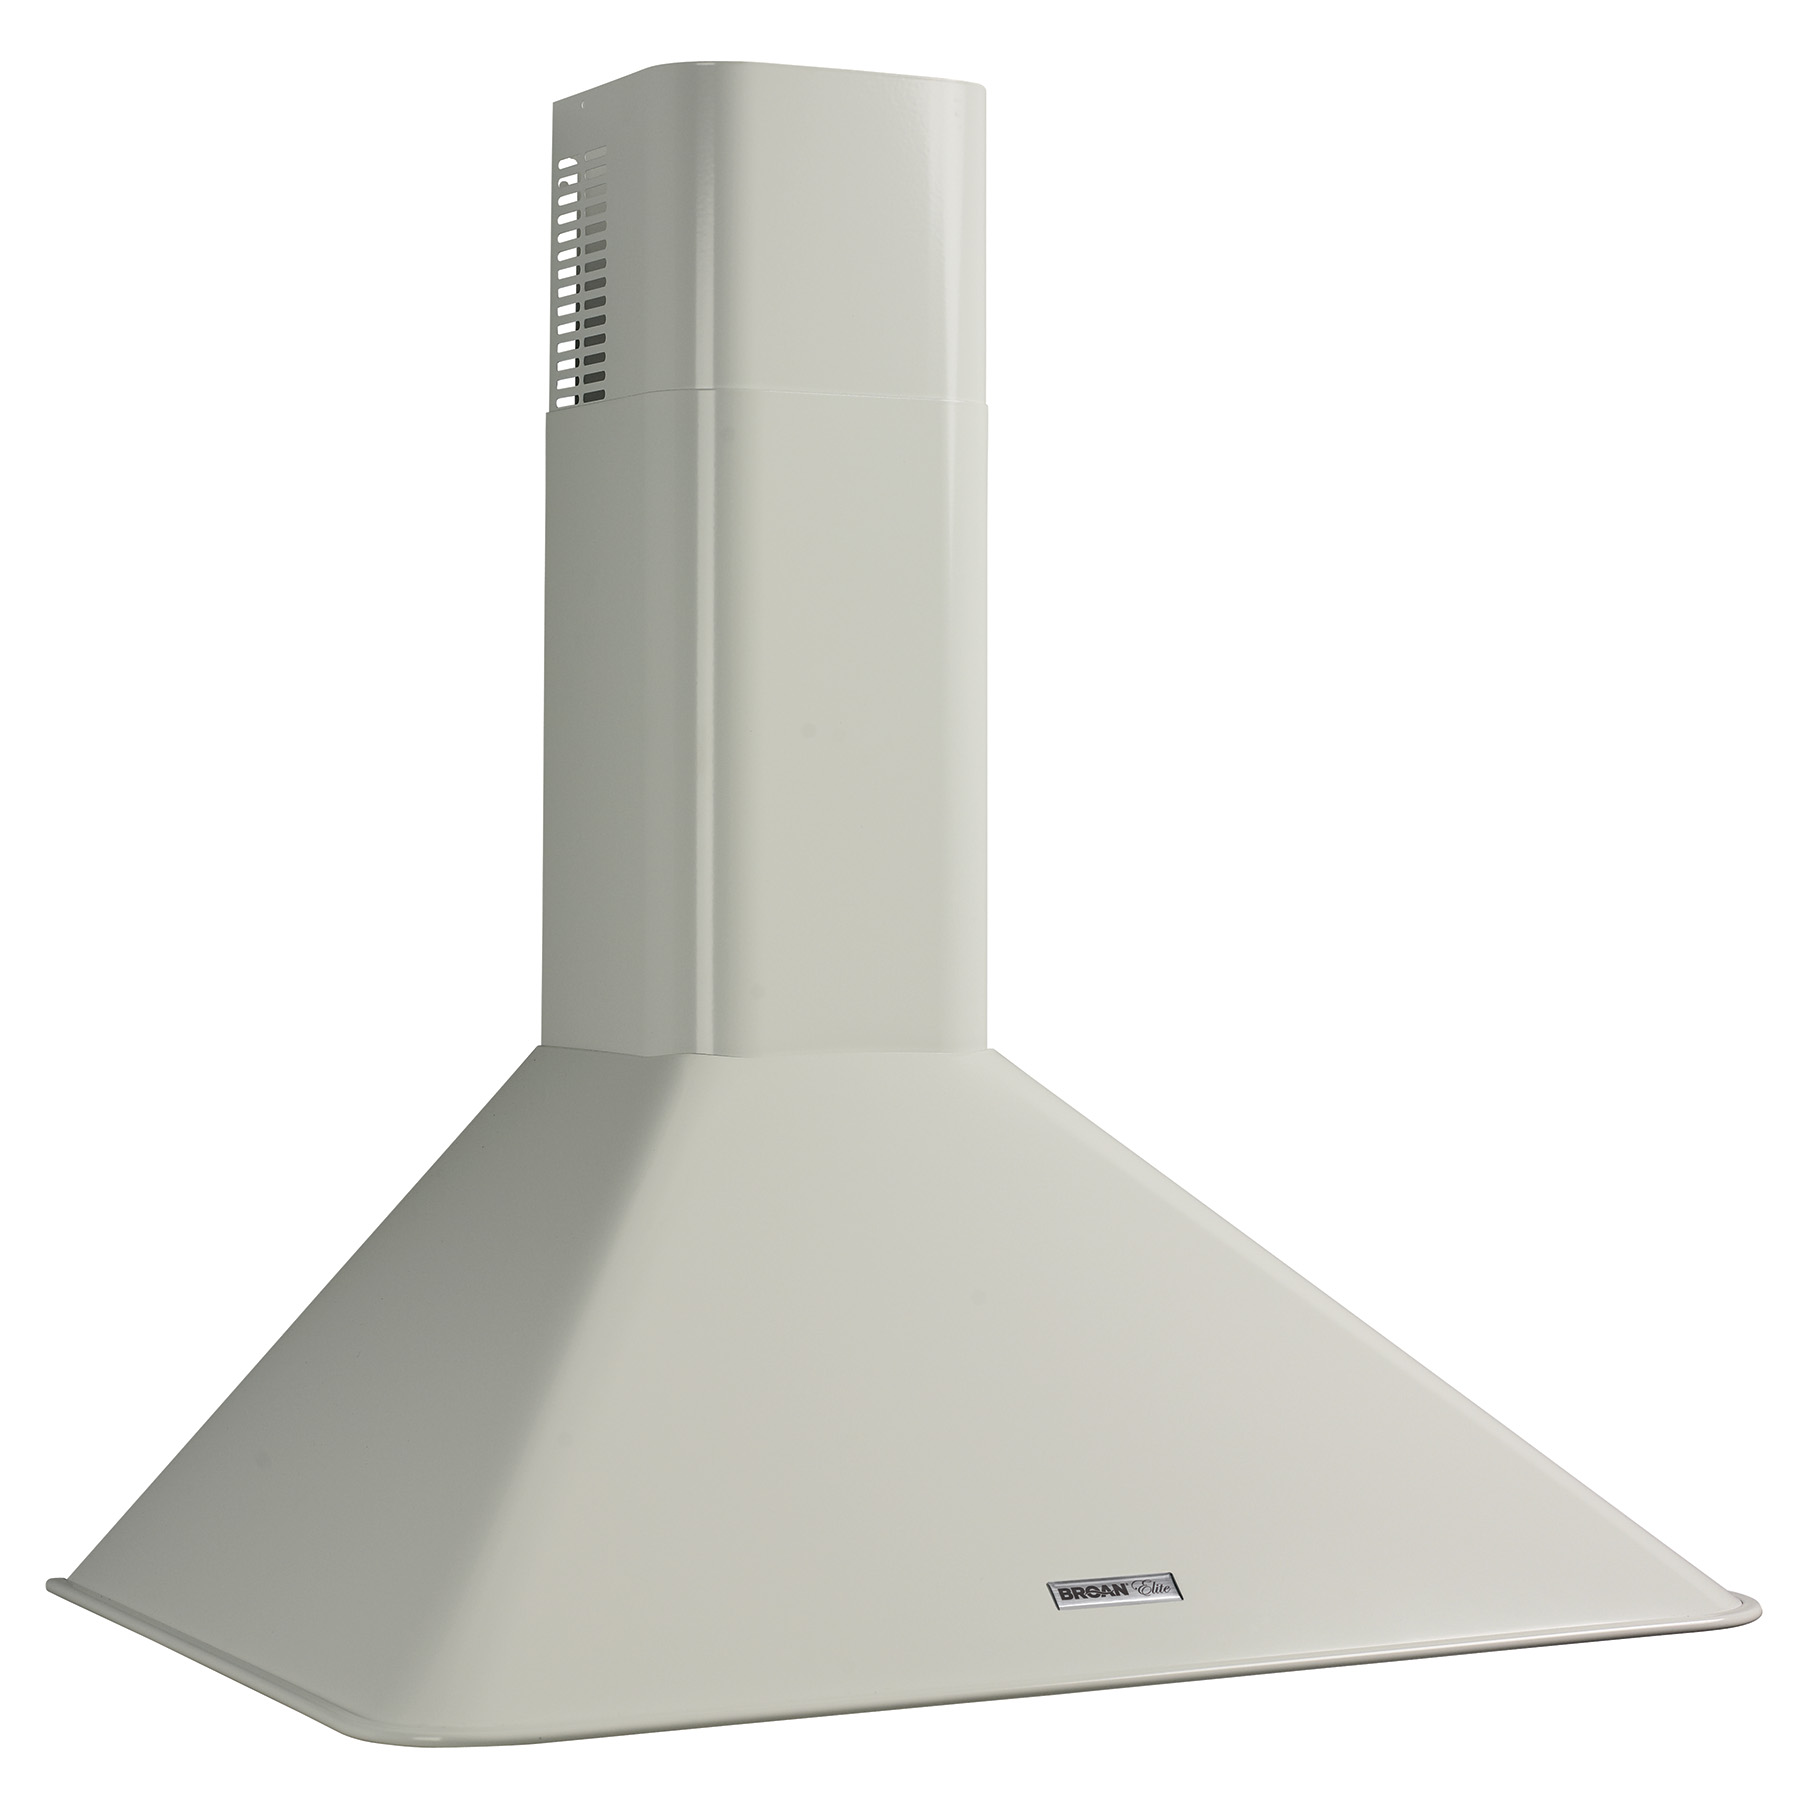 DISCONTINUED-Broan® 30-Inch Convertible Wall-Mount Chimney Range Hood w/ Heat Sentry™, 290 CFM, White